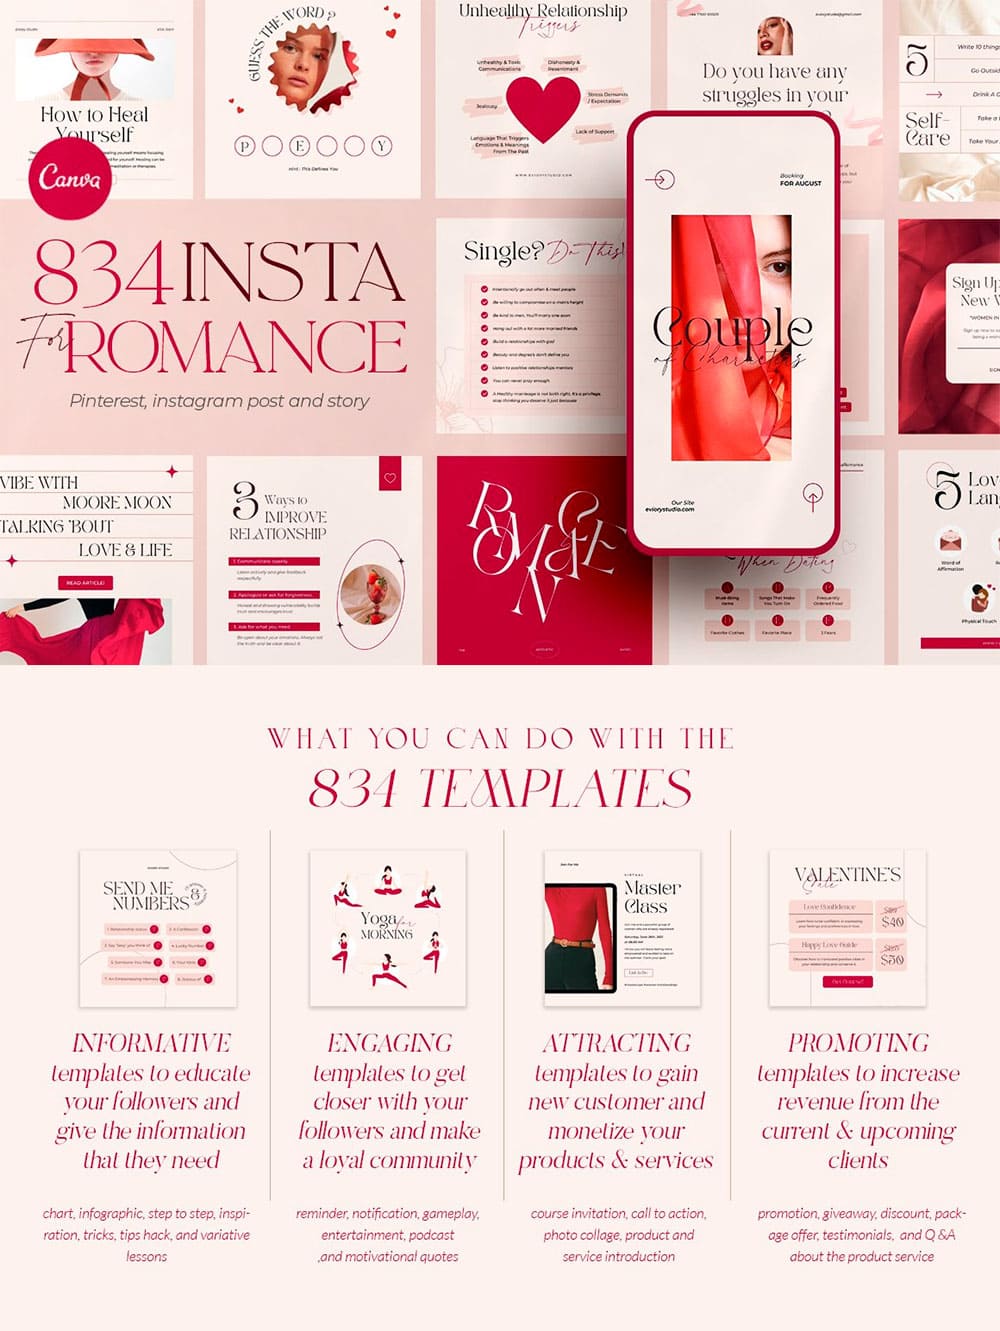 Sale romance creator for coach canva, picture for pinterest.